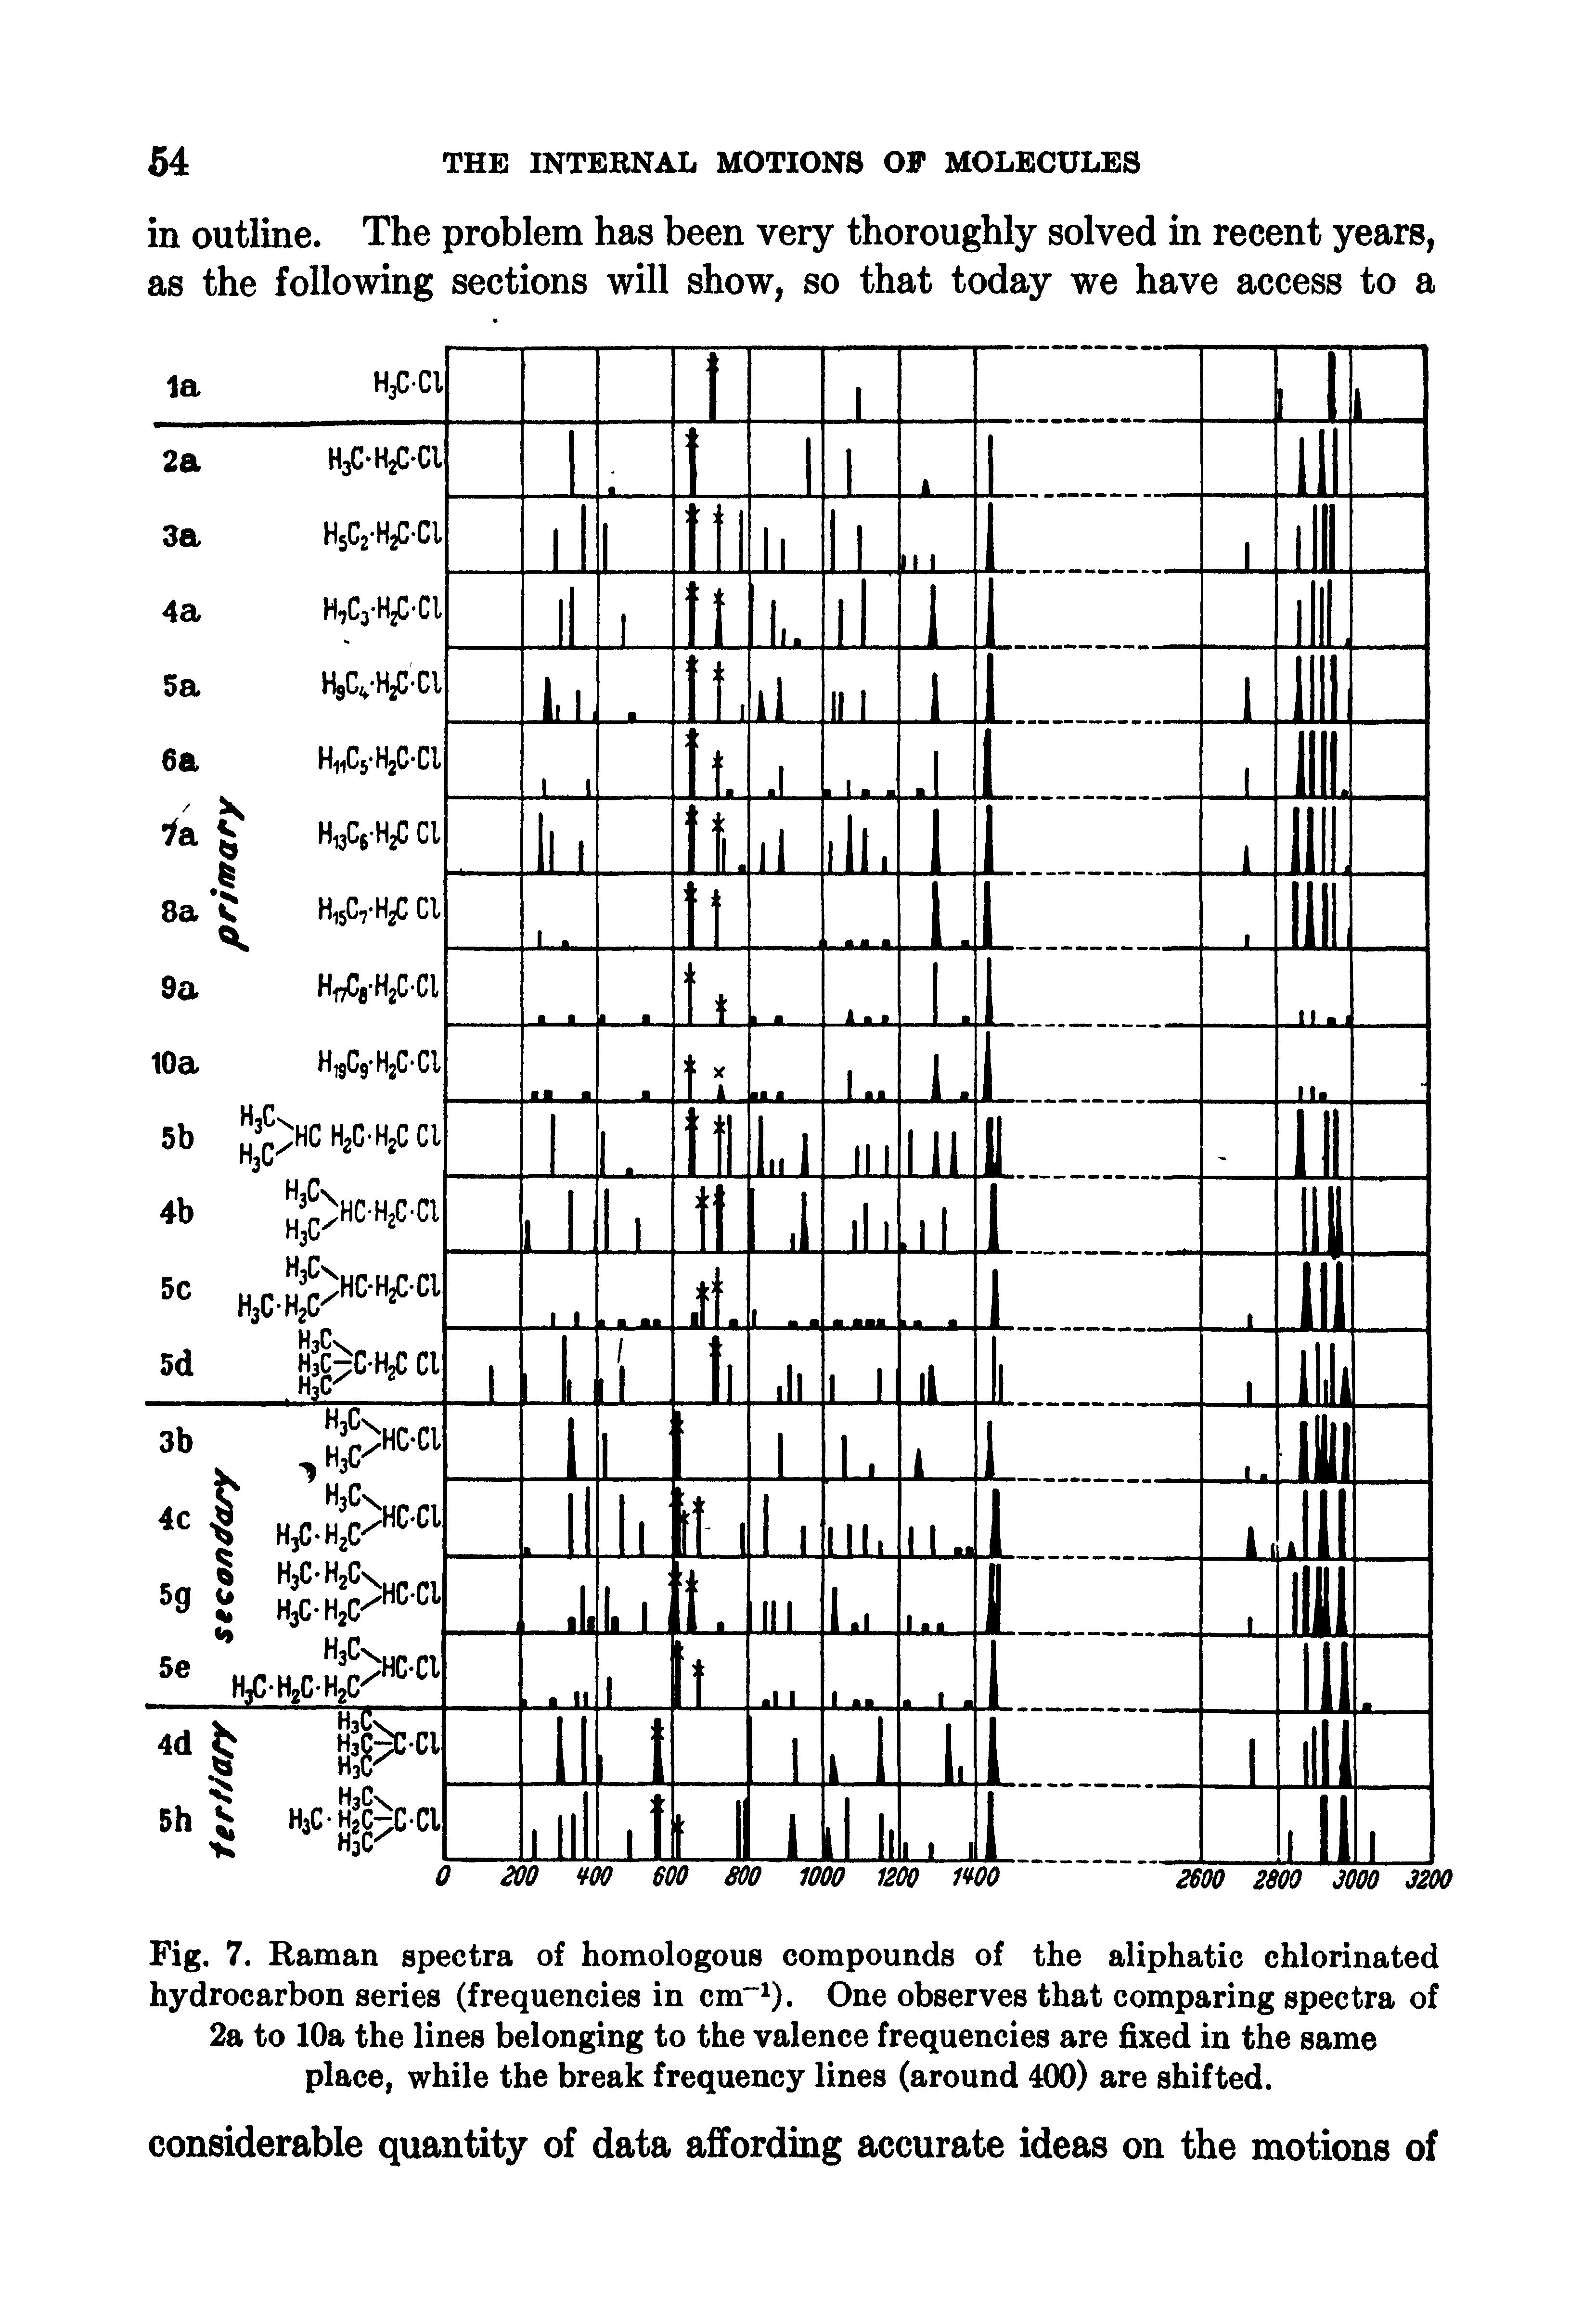 Fig. 7. Raman spectra of homologous compounds of the aliphatic chlorinated hydrocarbon series (frequencies in cm ). One observes that comparing spectra of 2a to 10a the lines belonging to the valence frequencies are fixed in the same place, while the break frequency lines (around 400) are shifted.